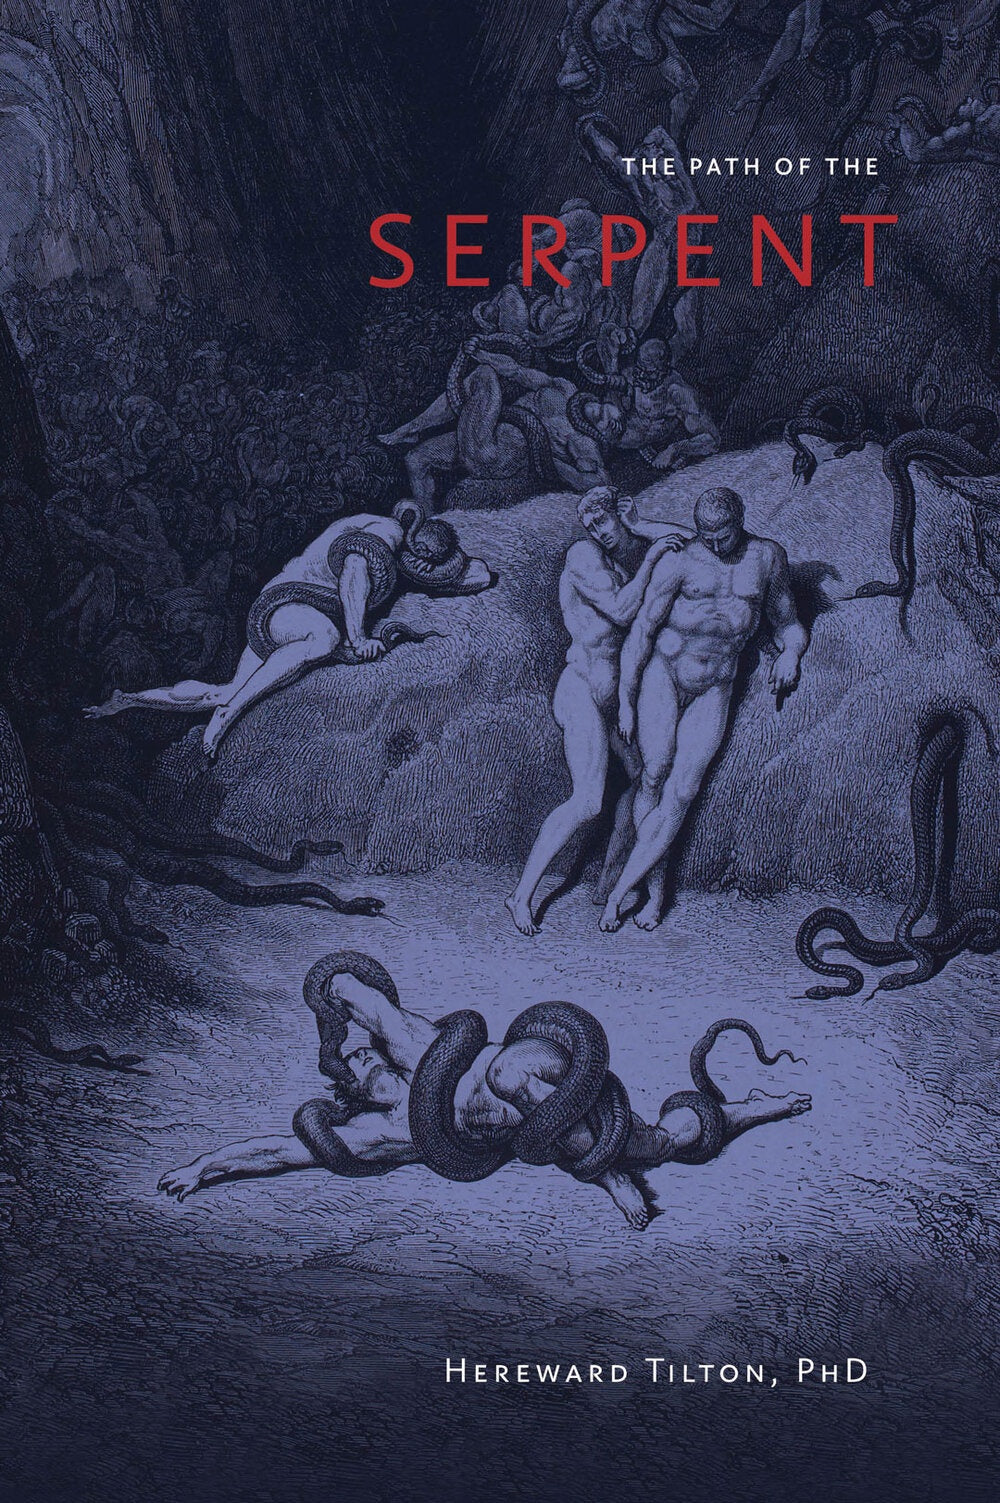 The Path of the Serpent Volume One